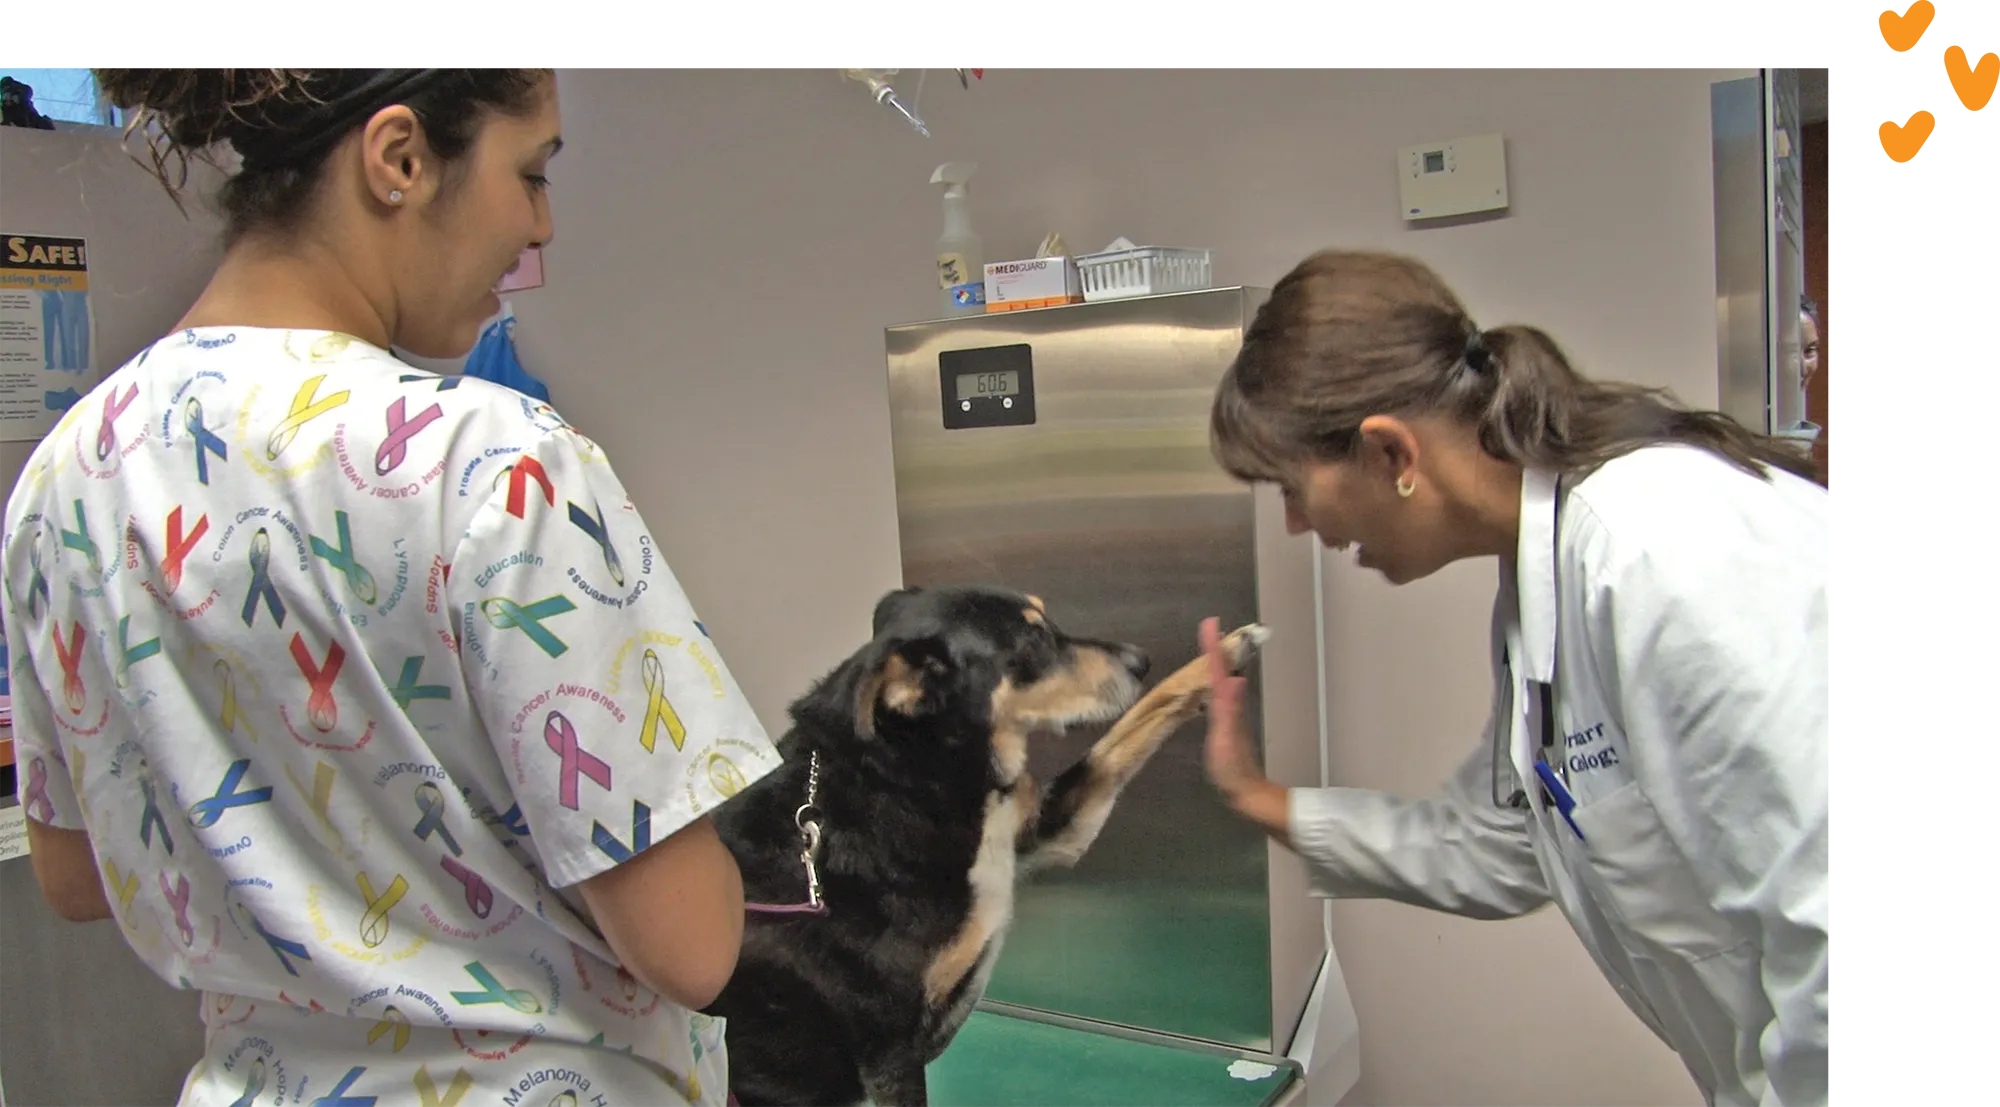 Dr. Alsarraf pictured high-fiving a dog as a vet tech stands near by